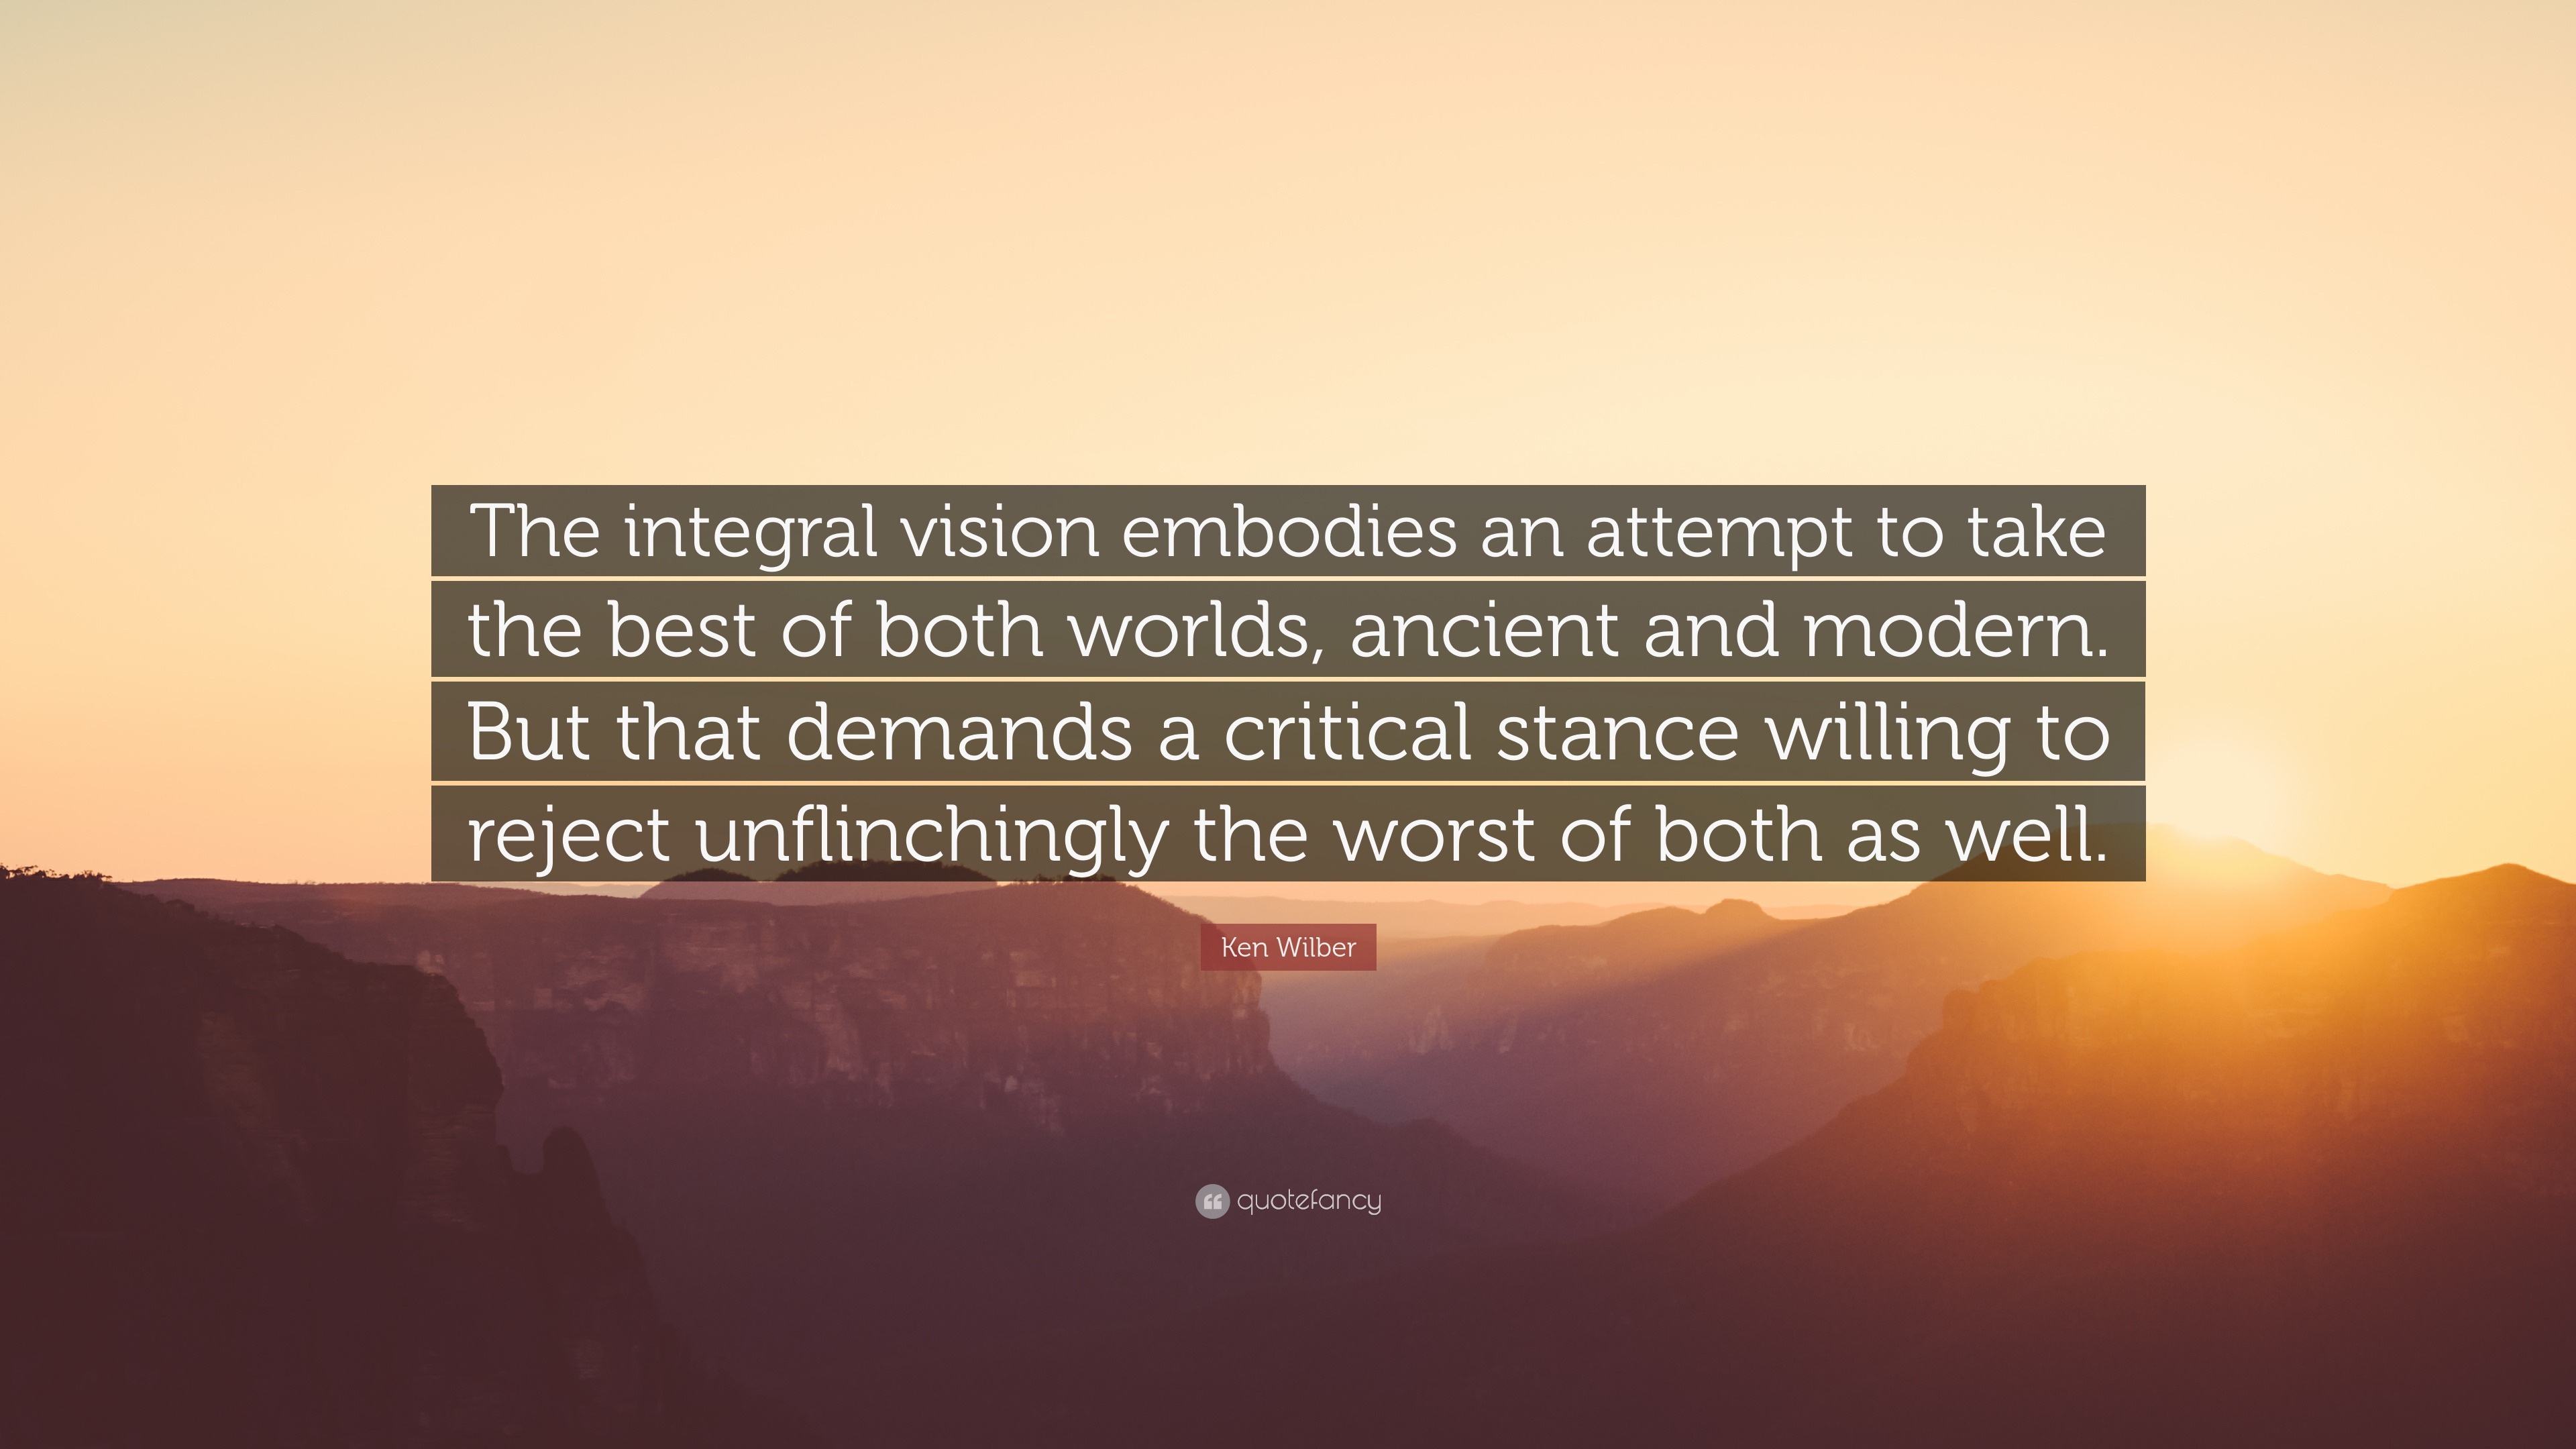 Ken Wilber Quote: “The Integral Vision Embodies An Attempt To Take The Best Of Both Worlds, Ancient And Modern. But That Demands A Critical...”